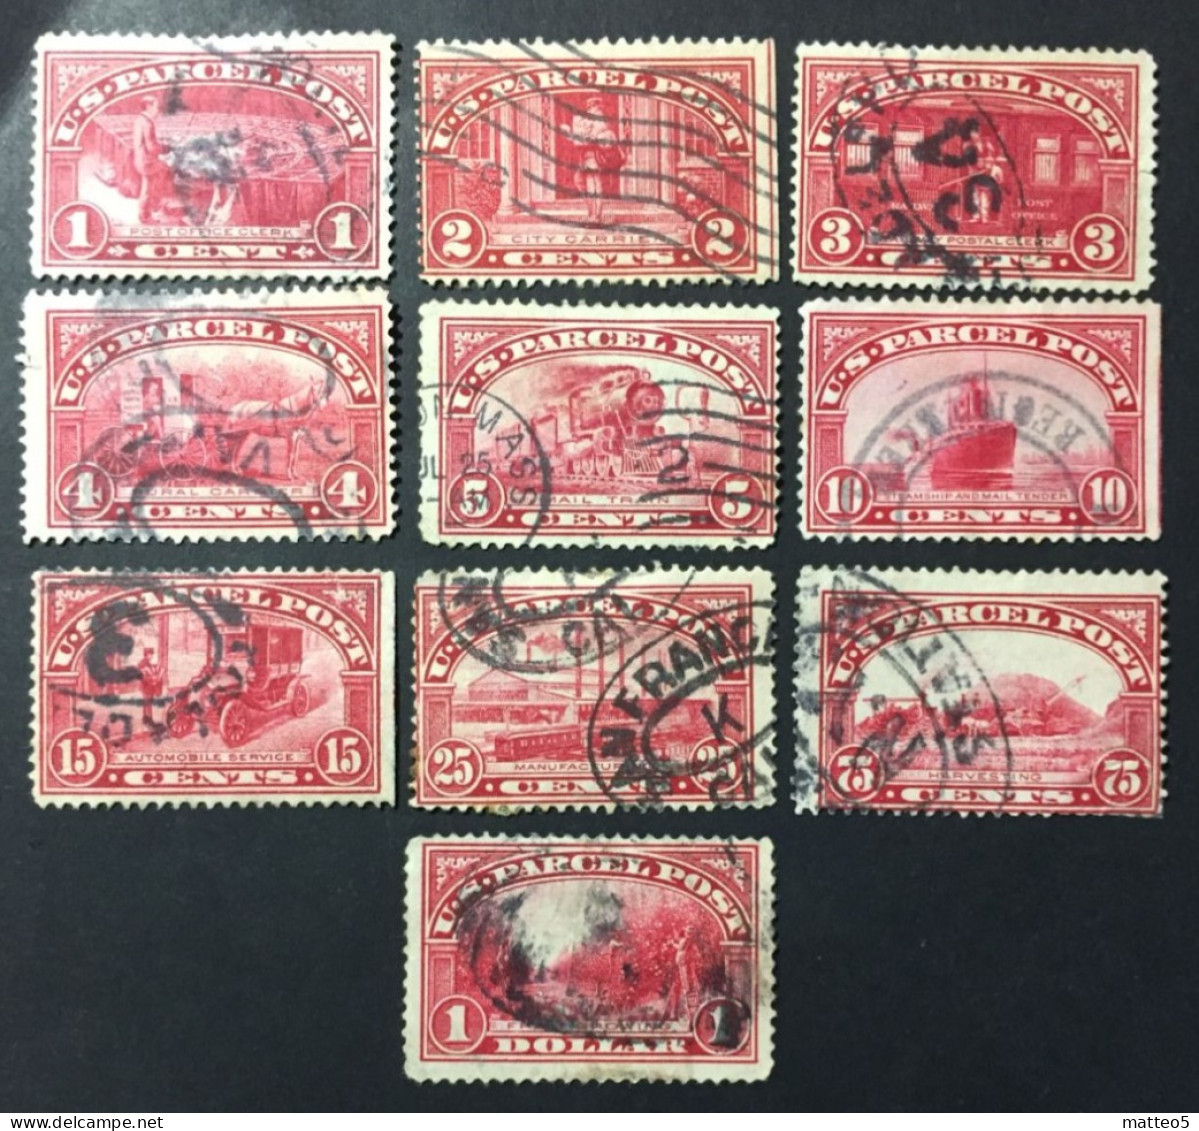 1912 - United States - Parcel Post Colonies Postage Due With - 10 Stamps - Used - Service